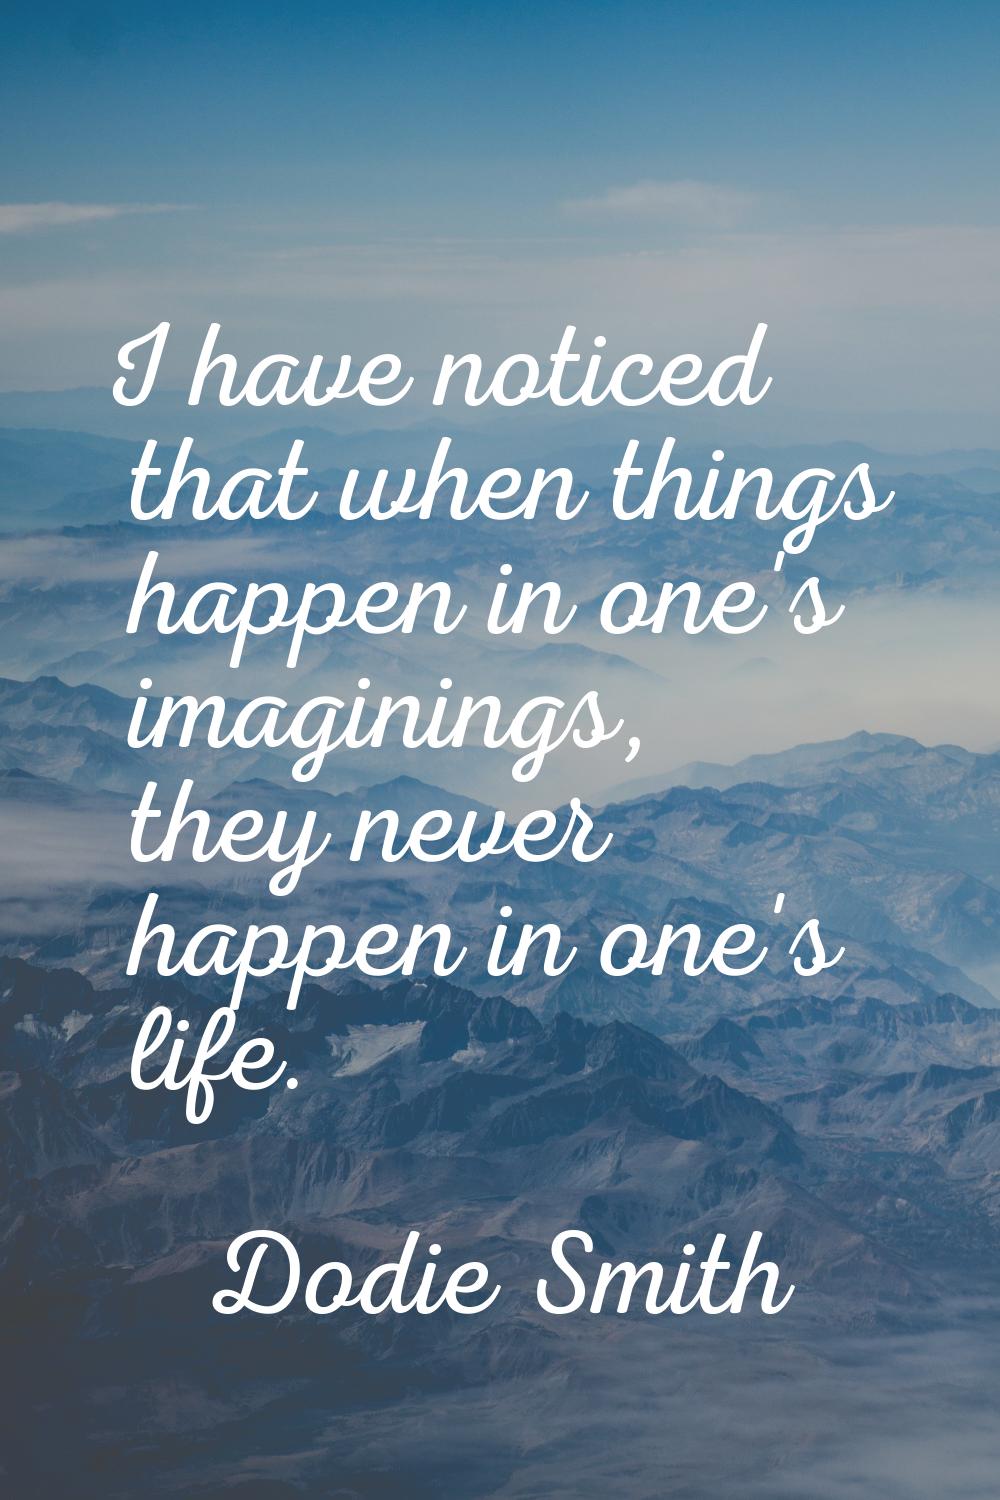 I have noticed that when things happen in one's imaginings, they never happen in one's life.